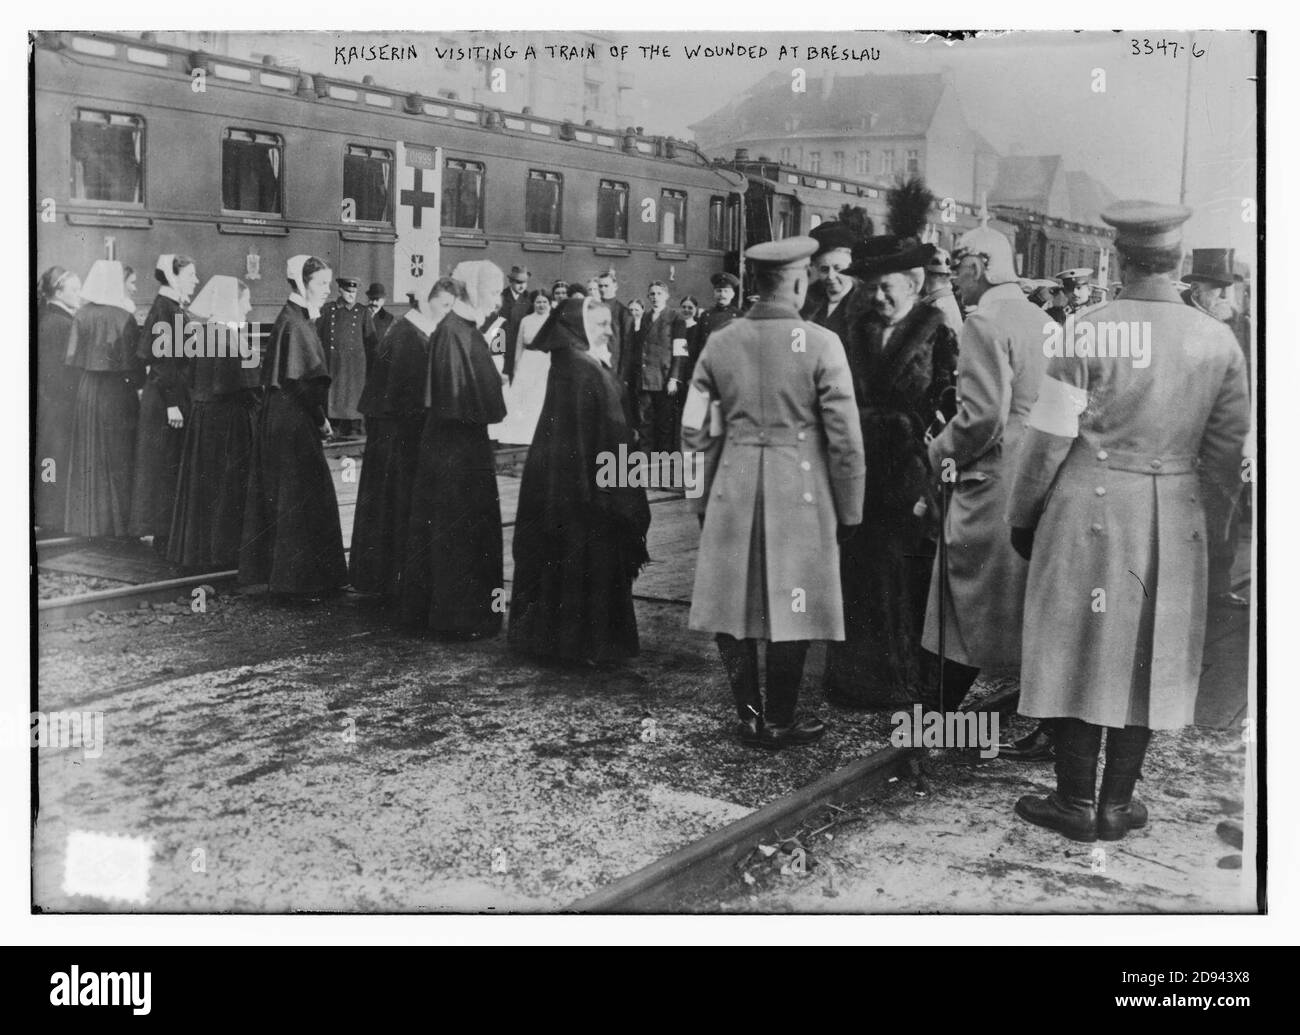 Kaiserin visiting a train of the wounded at Breslau Stock Photo